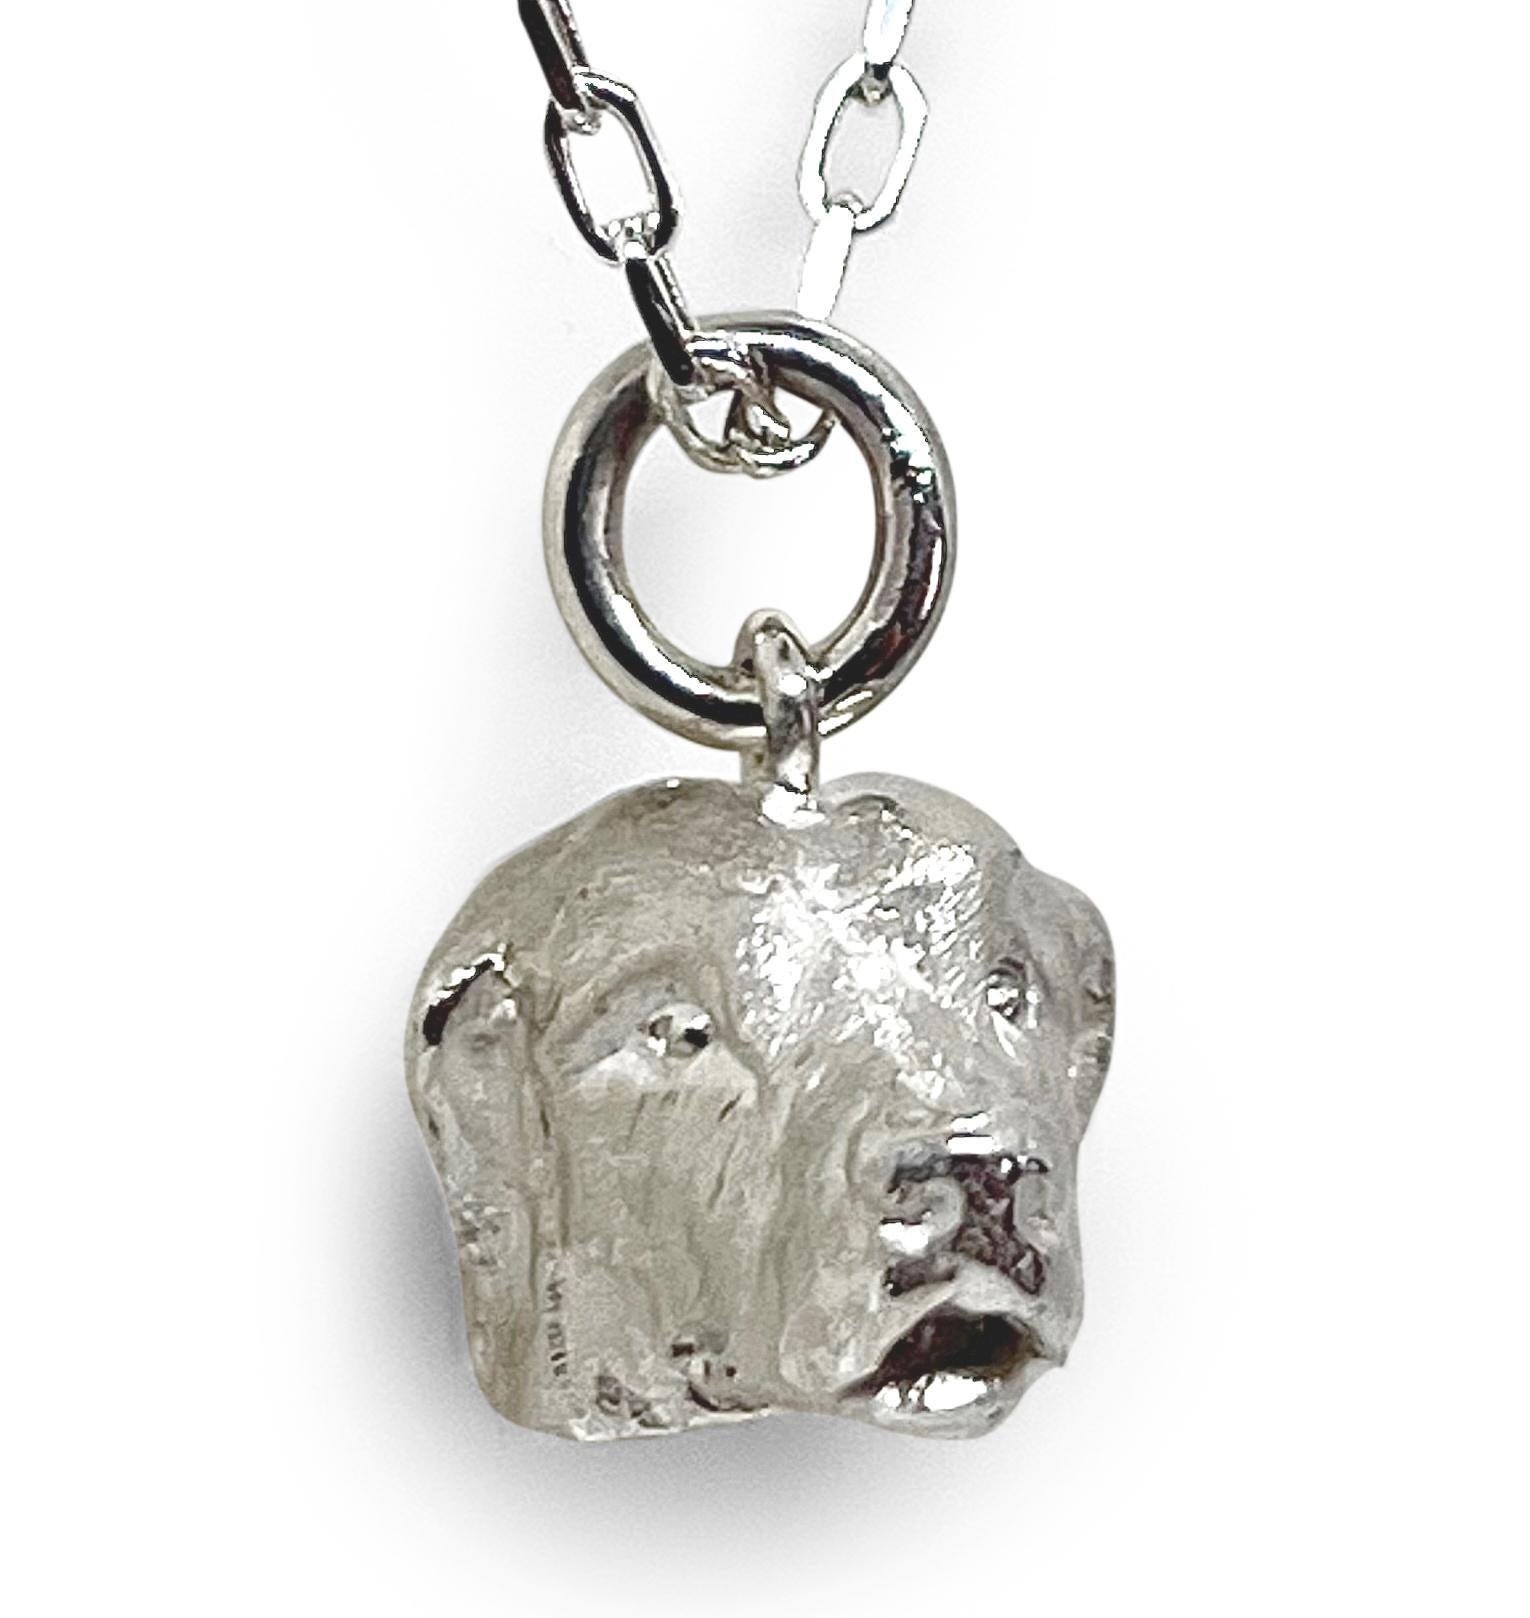 Artisan Paul Eaton Sculpted Miniature Labrador Head in Sterling Silver Charm or Pendant  For Sale